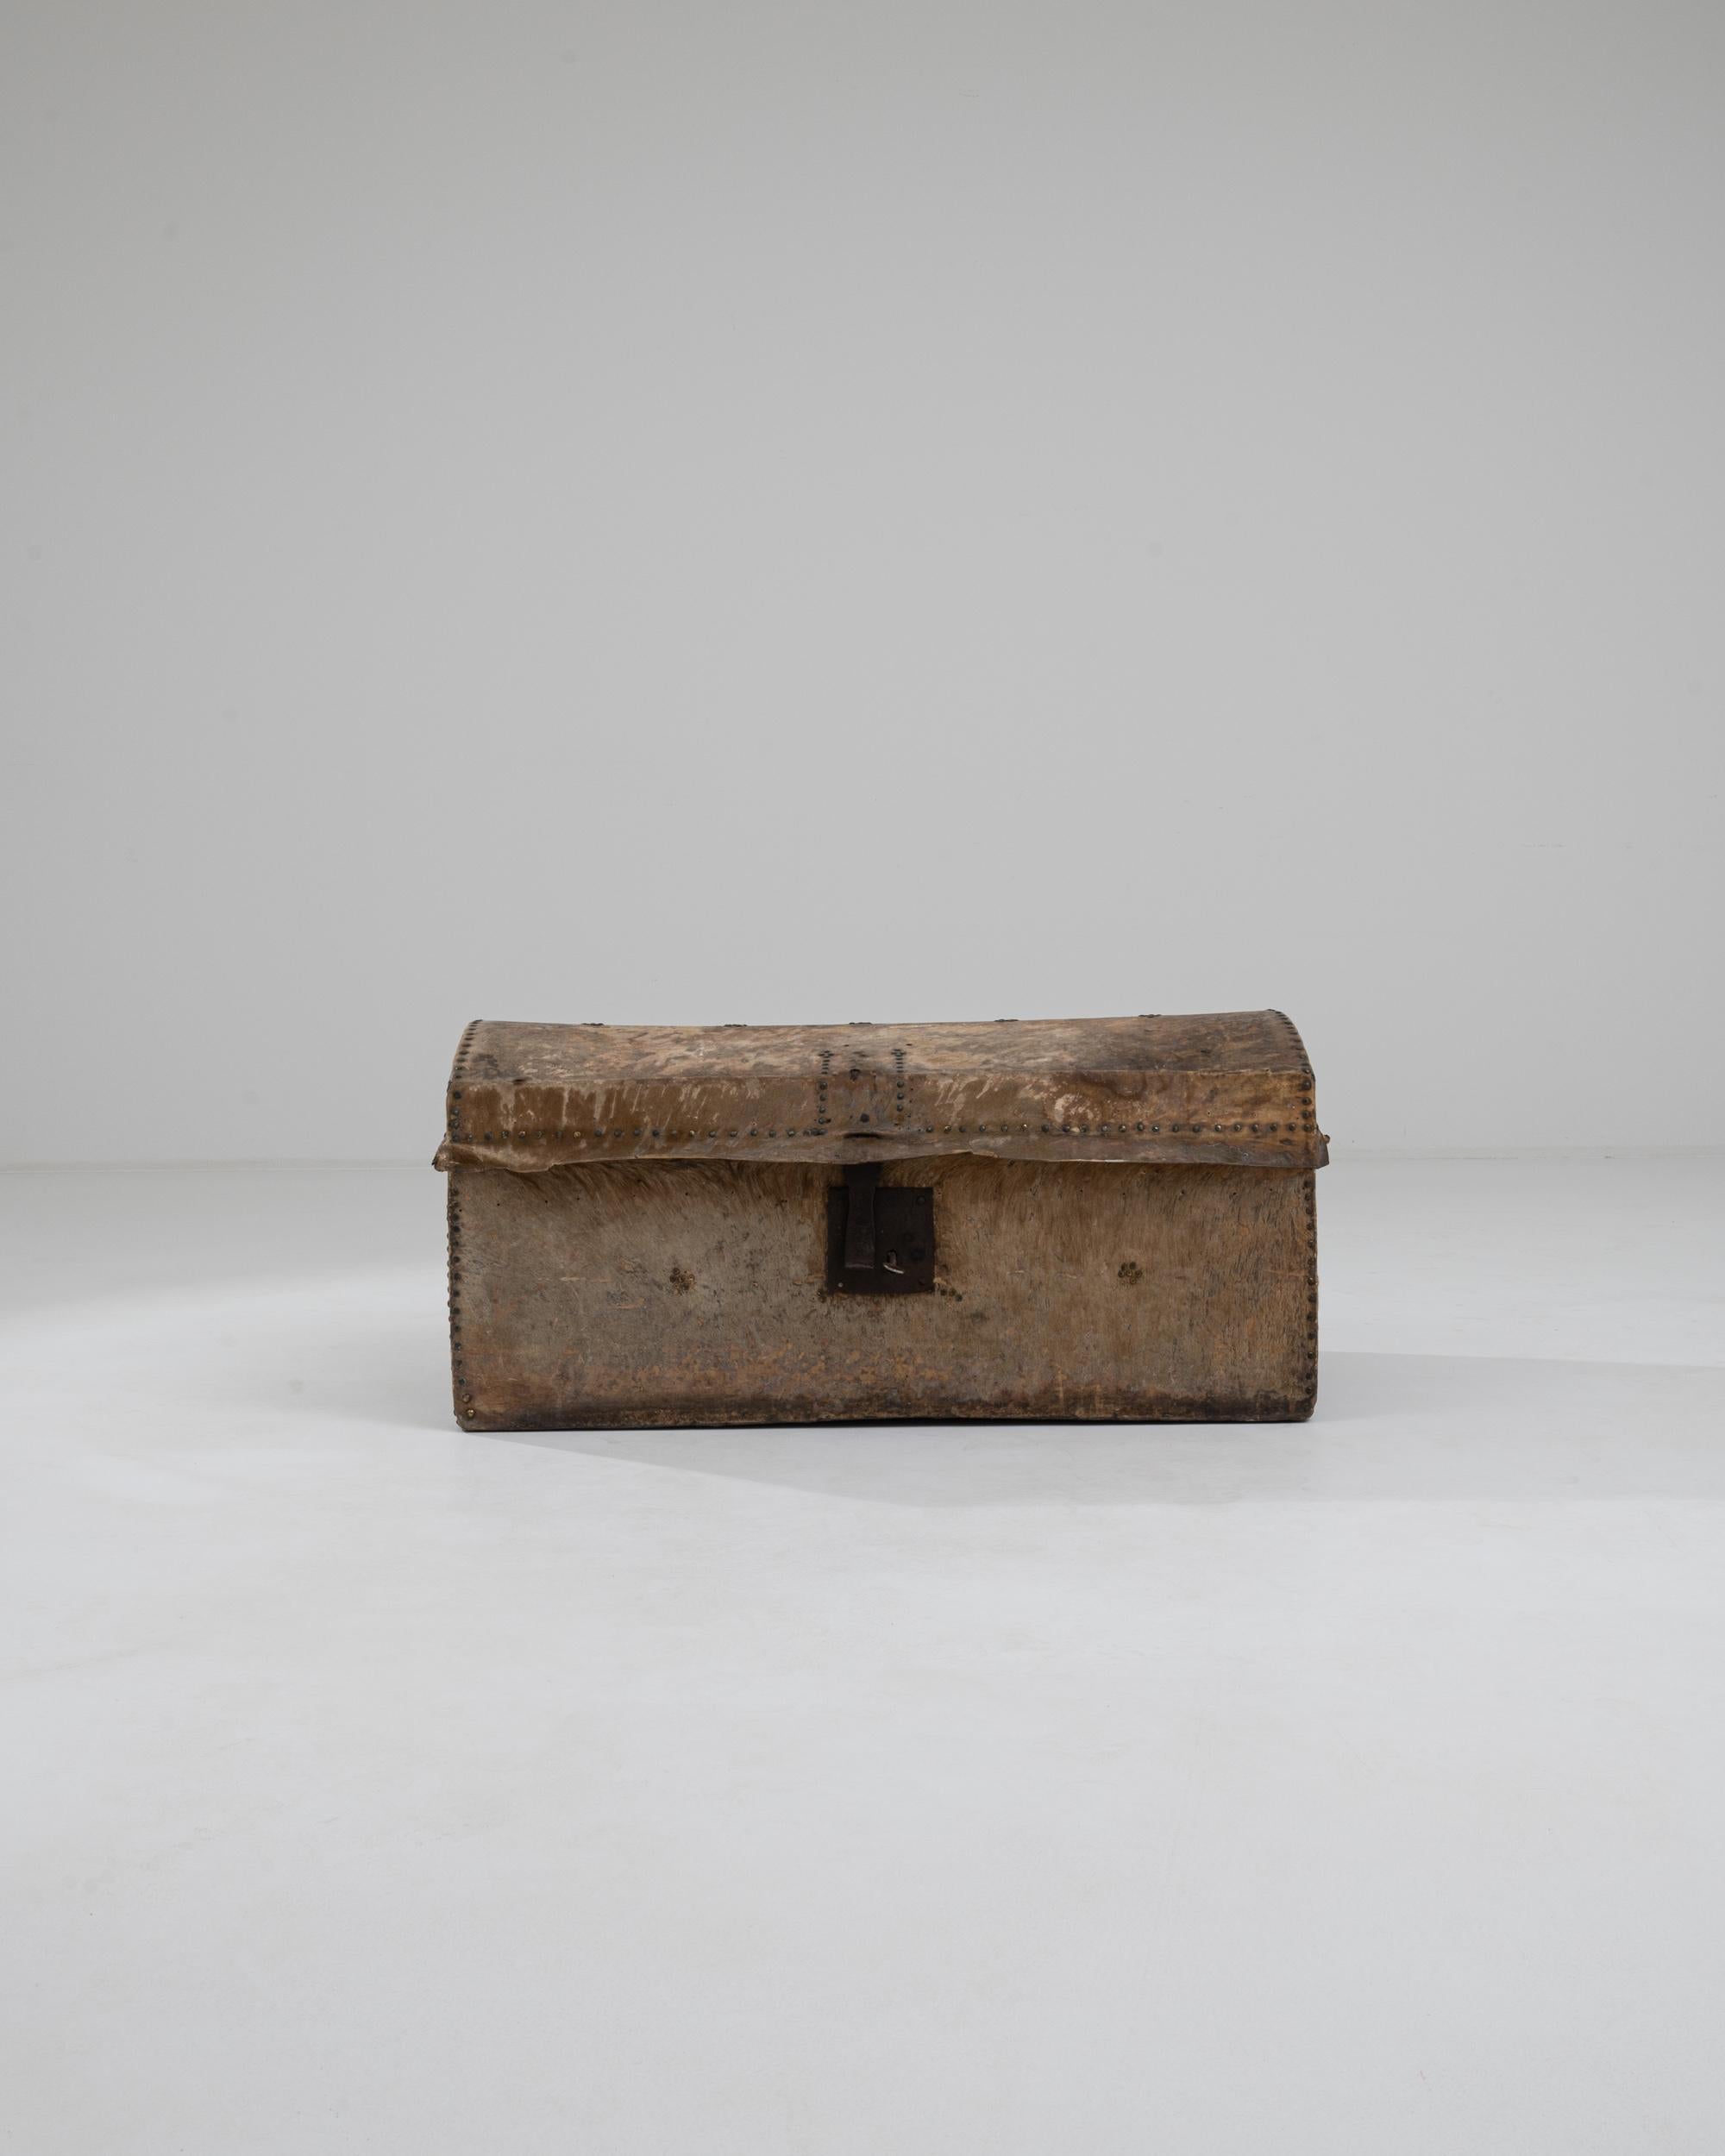 The rugged simplicity of this antique trunk has a timeless appeal. Made in France in the 1800s, the wooden case is bound in a leather cowhide. The hair of the animal is still visible in places, giving the trunk an earthy, rustic tactility, while